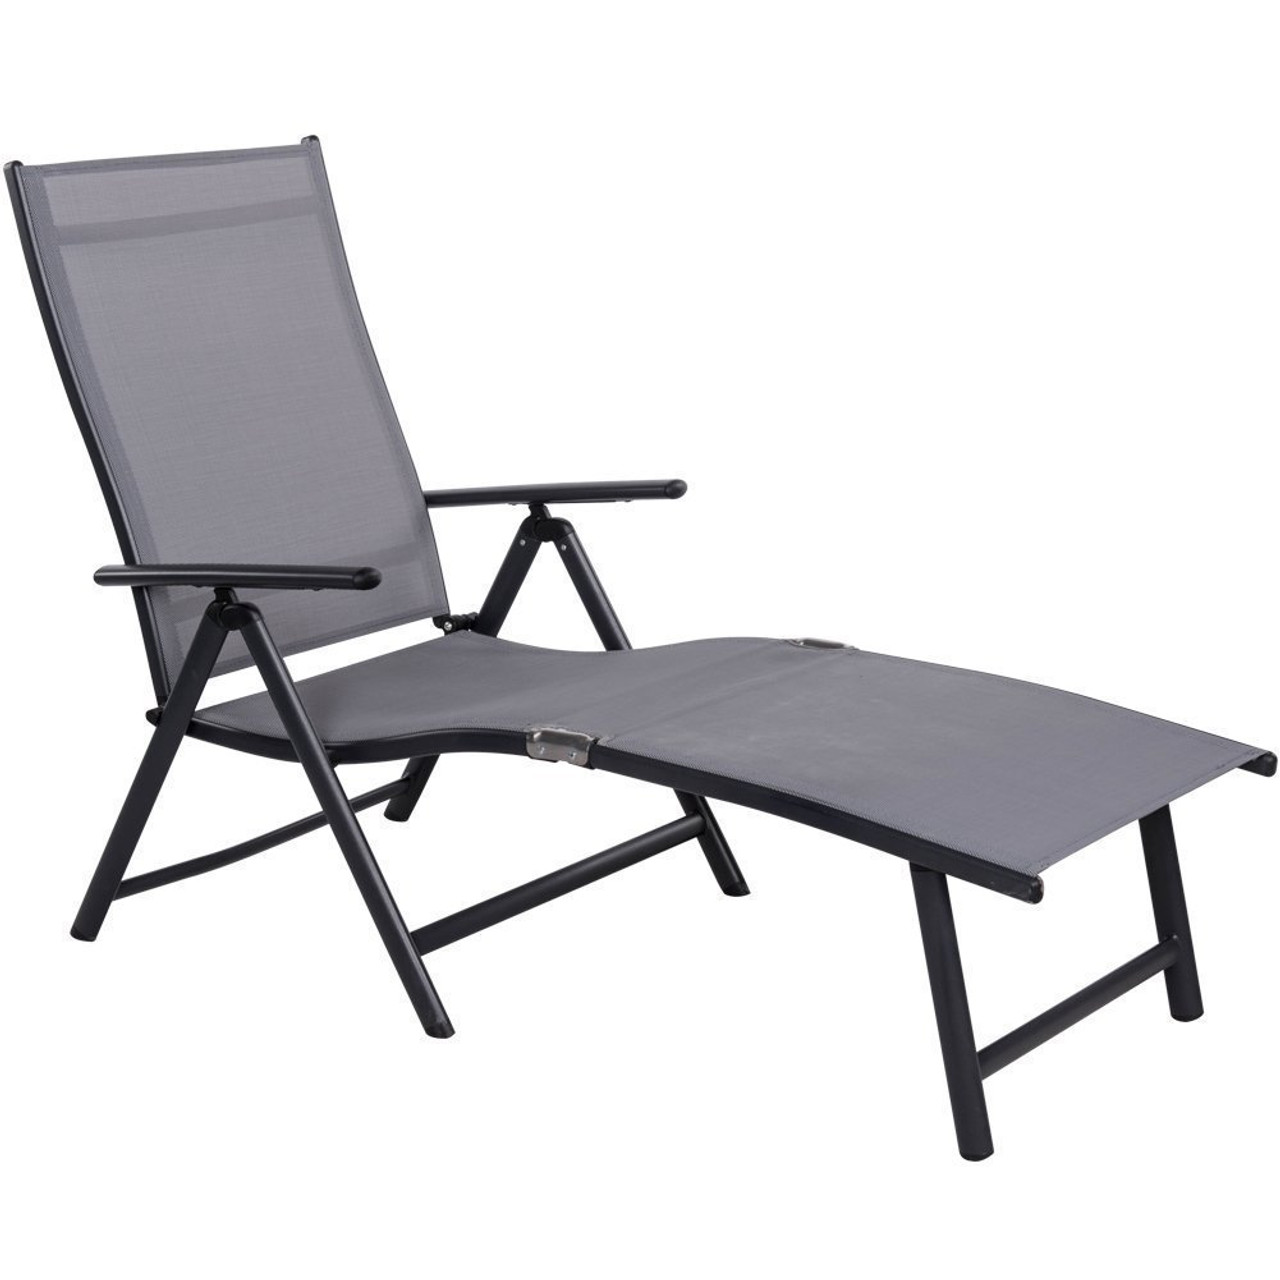 Deluxe Aluminum Beach Yard Pool Folding Chaise Lounge Chair Recliner Outdoor Patio